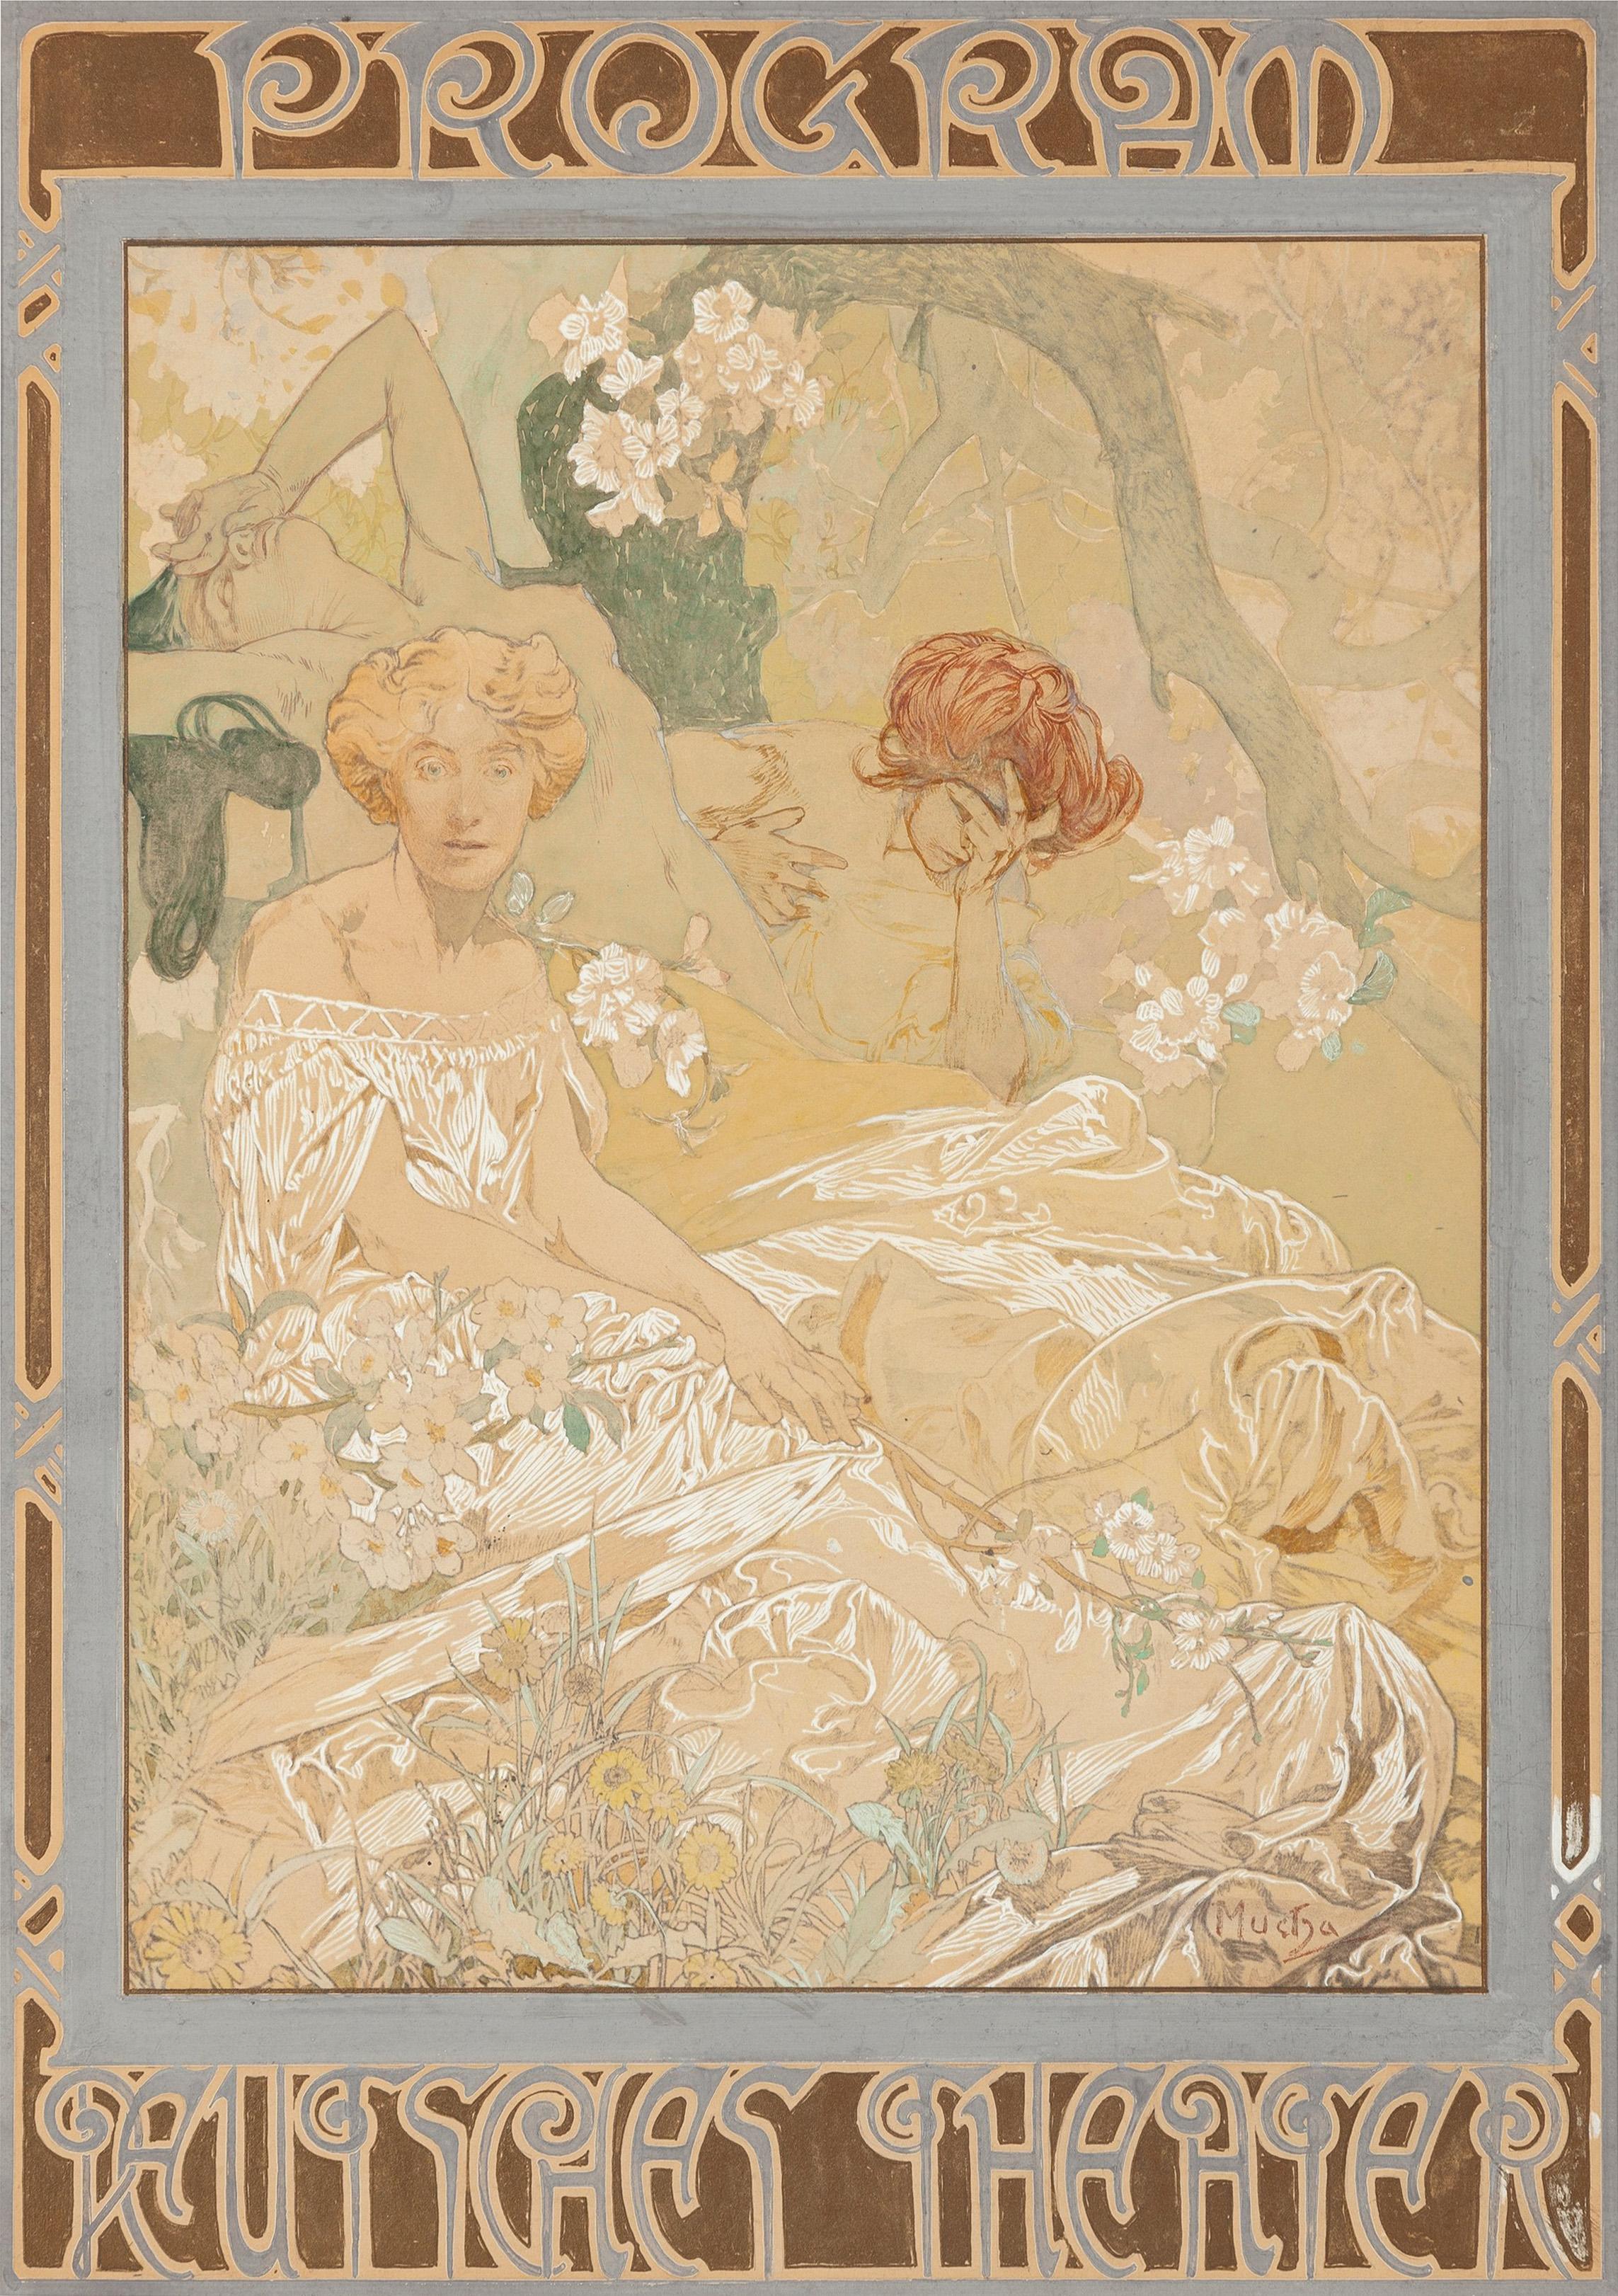 Watercolor, pencil, and gouache on board, final design for the Deutsches Schauspiel-Haus Theater Program, 1908
 
In 1908 Alphonse Mucha (1860-1939) was tasked with the redesign of the interior of the “Neues Deutsches Theater” (later on Irving Place